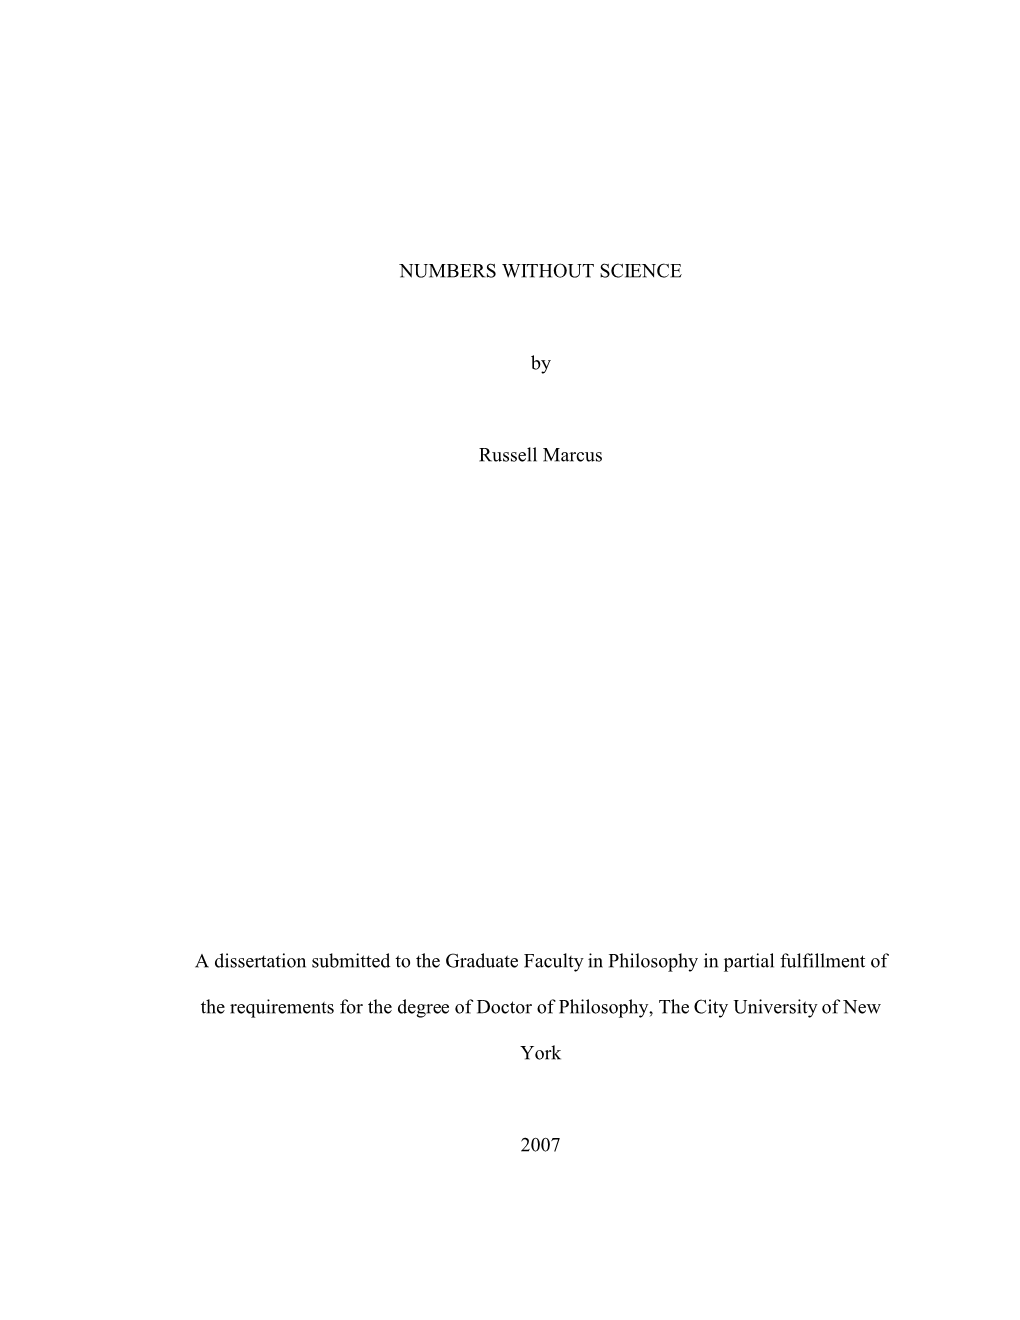 NUMBERS WITHOUT SCIENCE by Russell Marcus a Dissertation